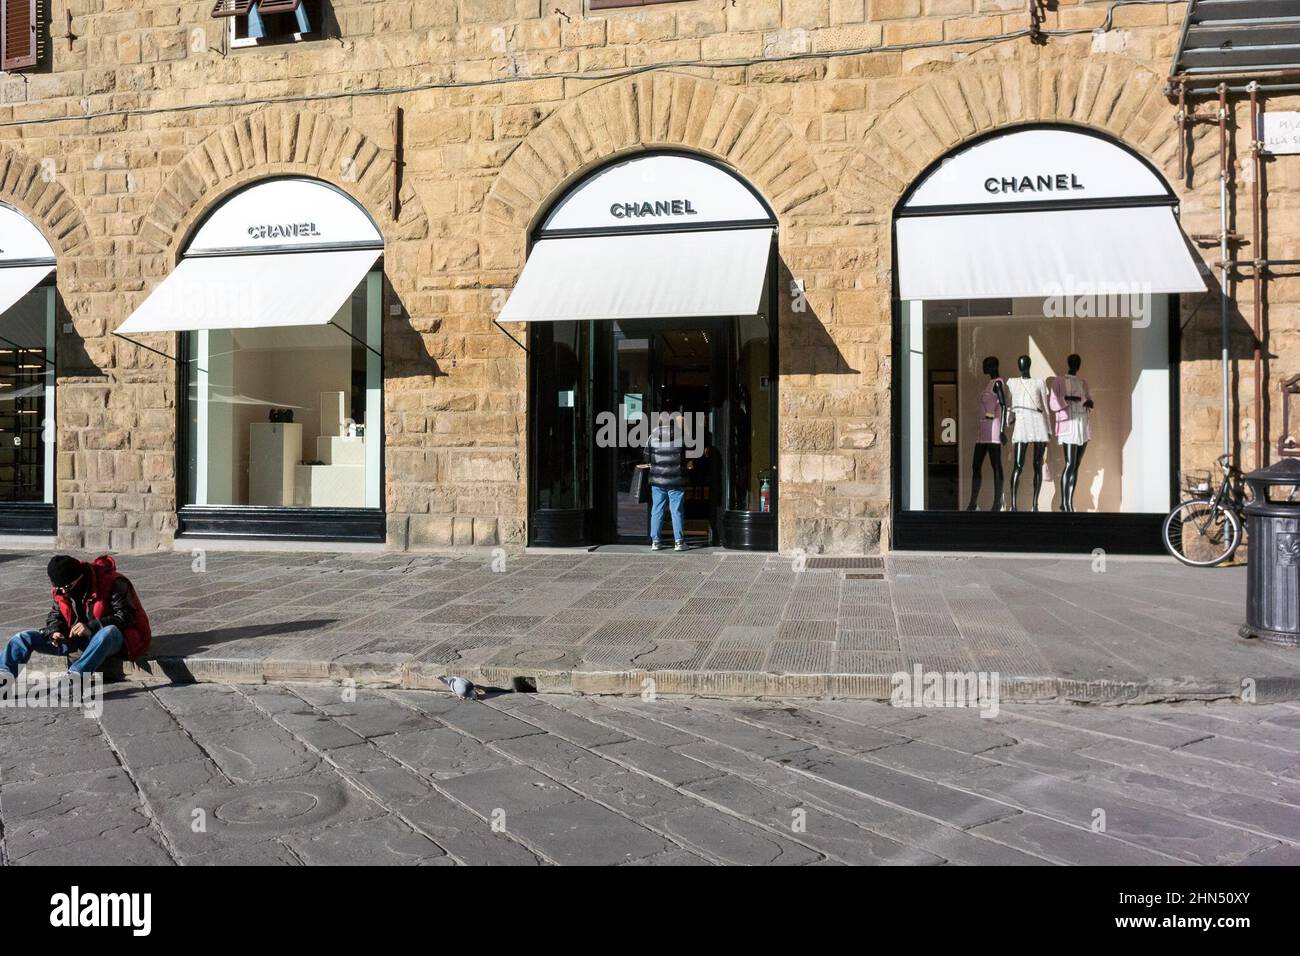 Florence, Christian Dior Fashion Designer Store, Front, Sign, Window Display, Storefront Stock Photo - Alamy